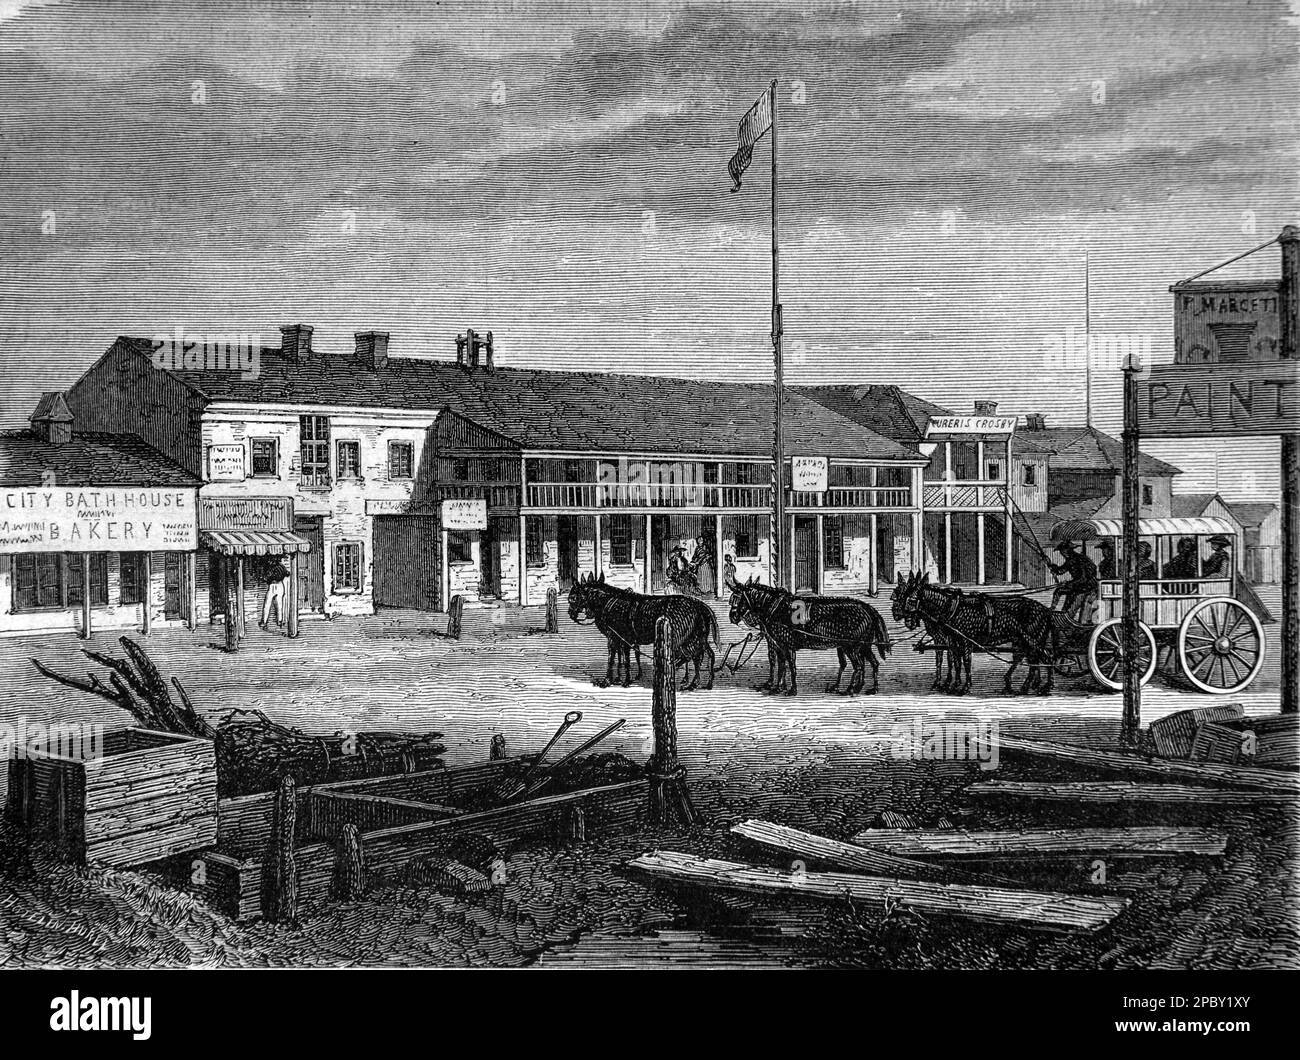 Early or Historic View of the High Street or Main Street with Coach and Horses, Stagecoach or Wagon in Salt Lake City Utah USA. Vintage Engraving or Illustration 1862 Stock Photo